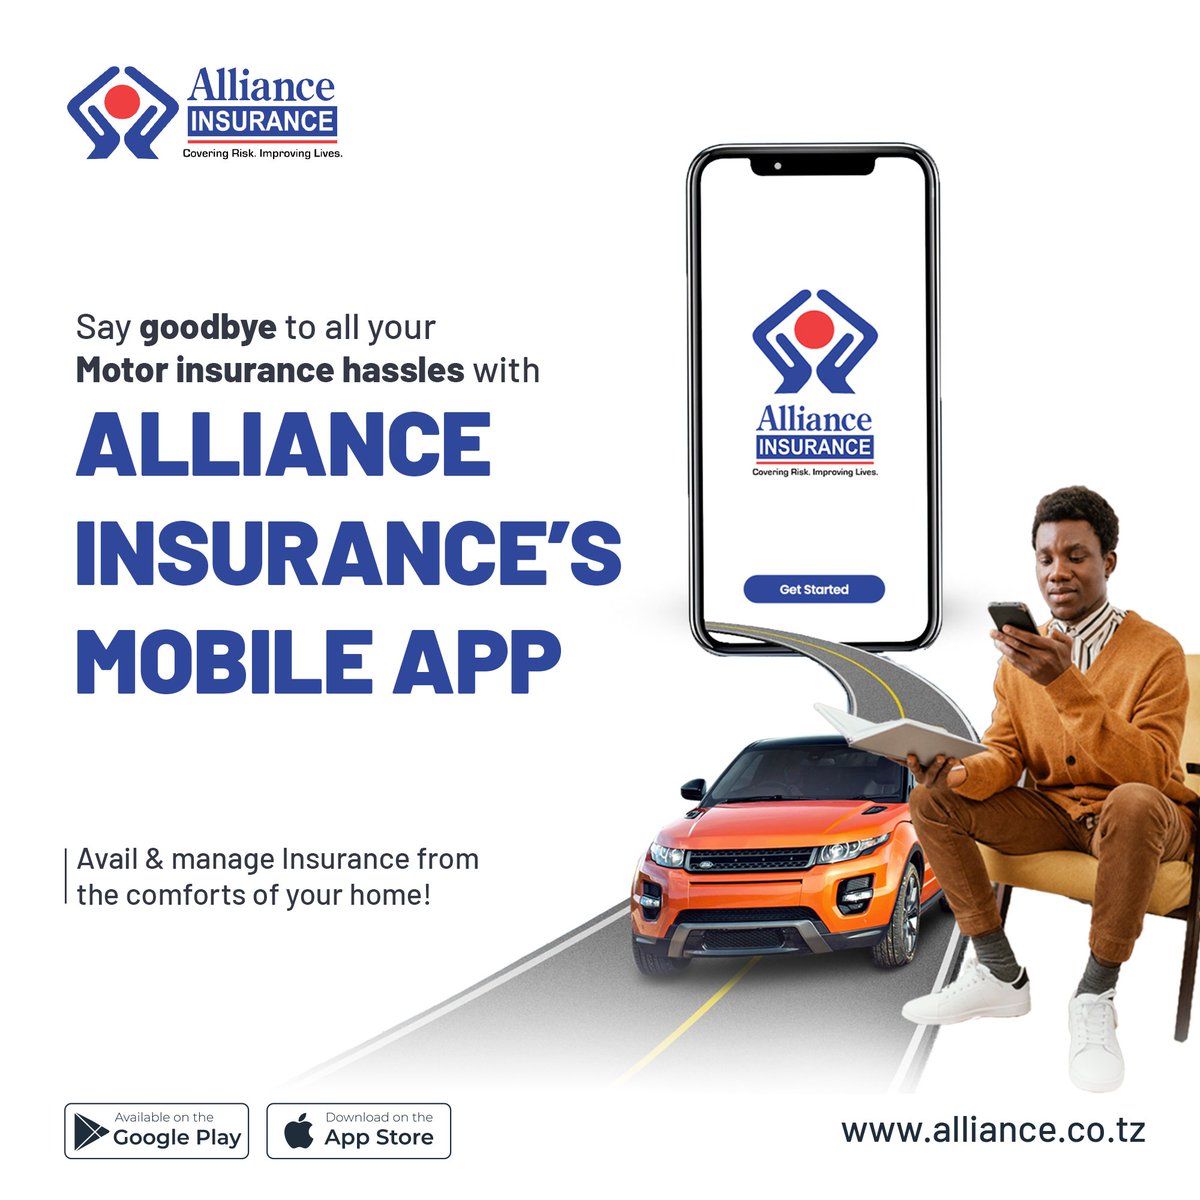 Get our quick and secure mobile app and manage all your insurance needs and payments virtually with Alliance Insurance. Download the app!
Play Store - bit.ly/3GIQ4Gy
App Store - apple.co/3KwHP1c
#motorinsurance  #carinsurance #alliance #bimachapchap #insuranceapp